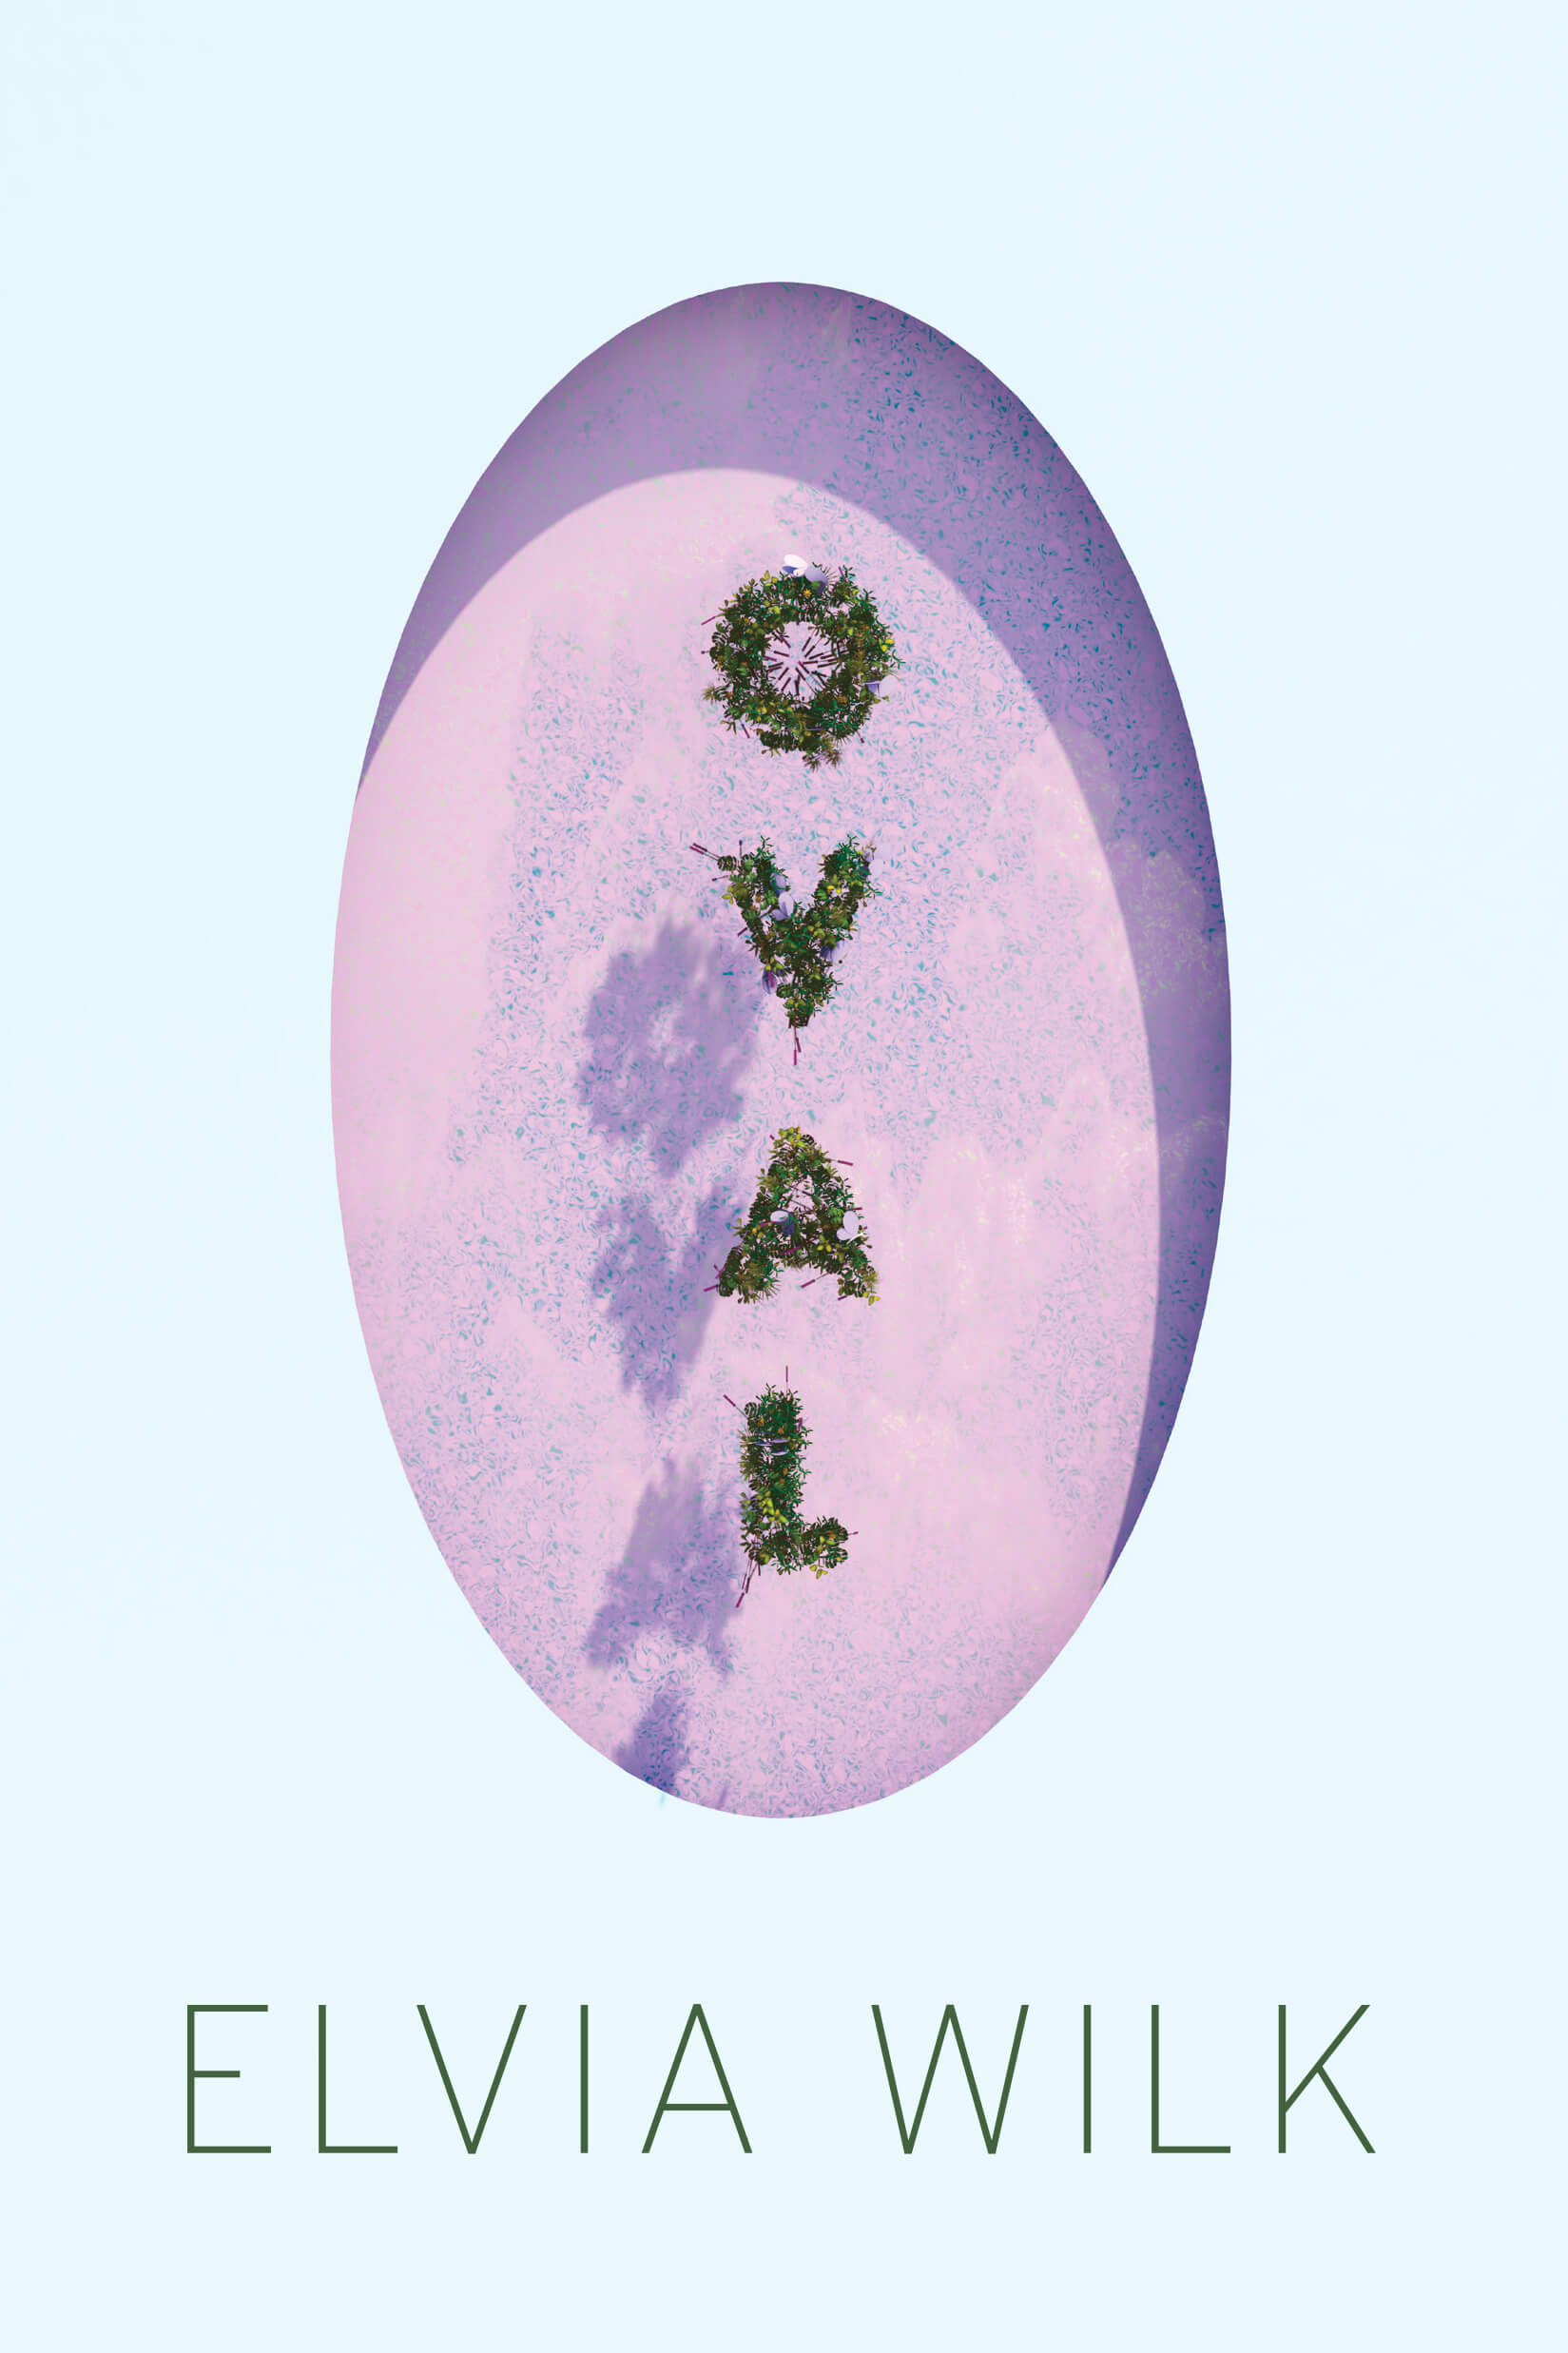 Oval by Elvia Wilk Alice Gregory at Swiss Institute